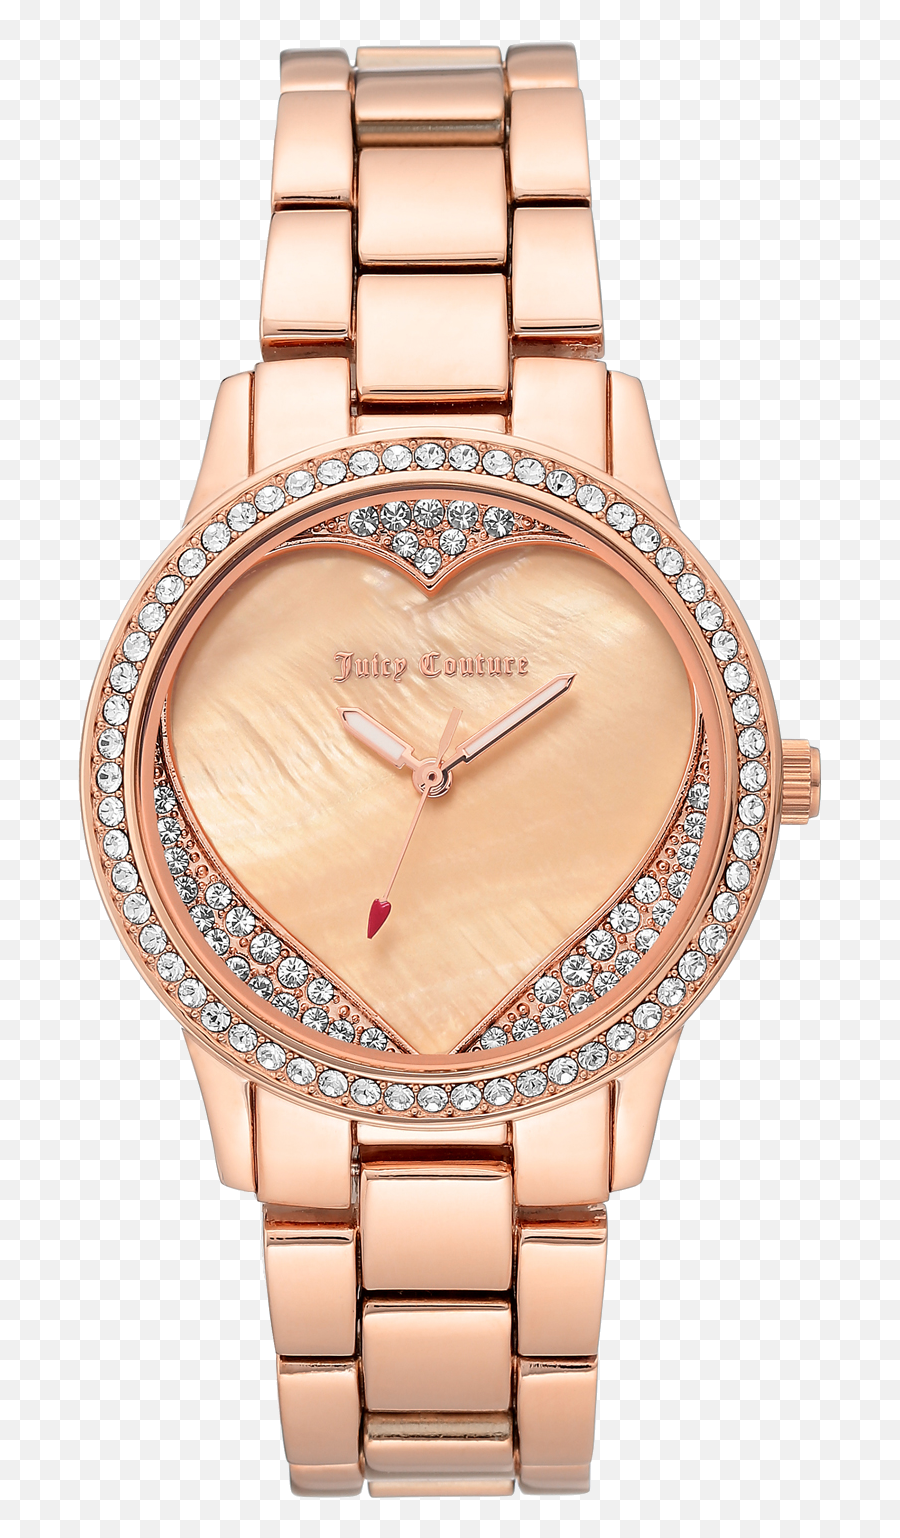 Juicy Couture Watch From Emoji,Juicy Couture Logo